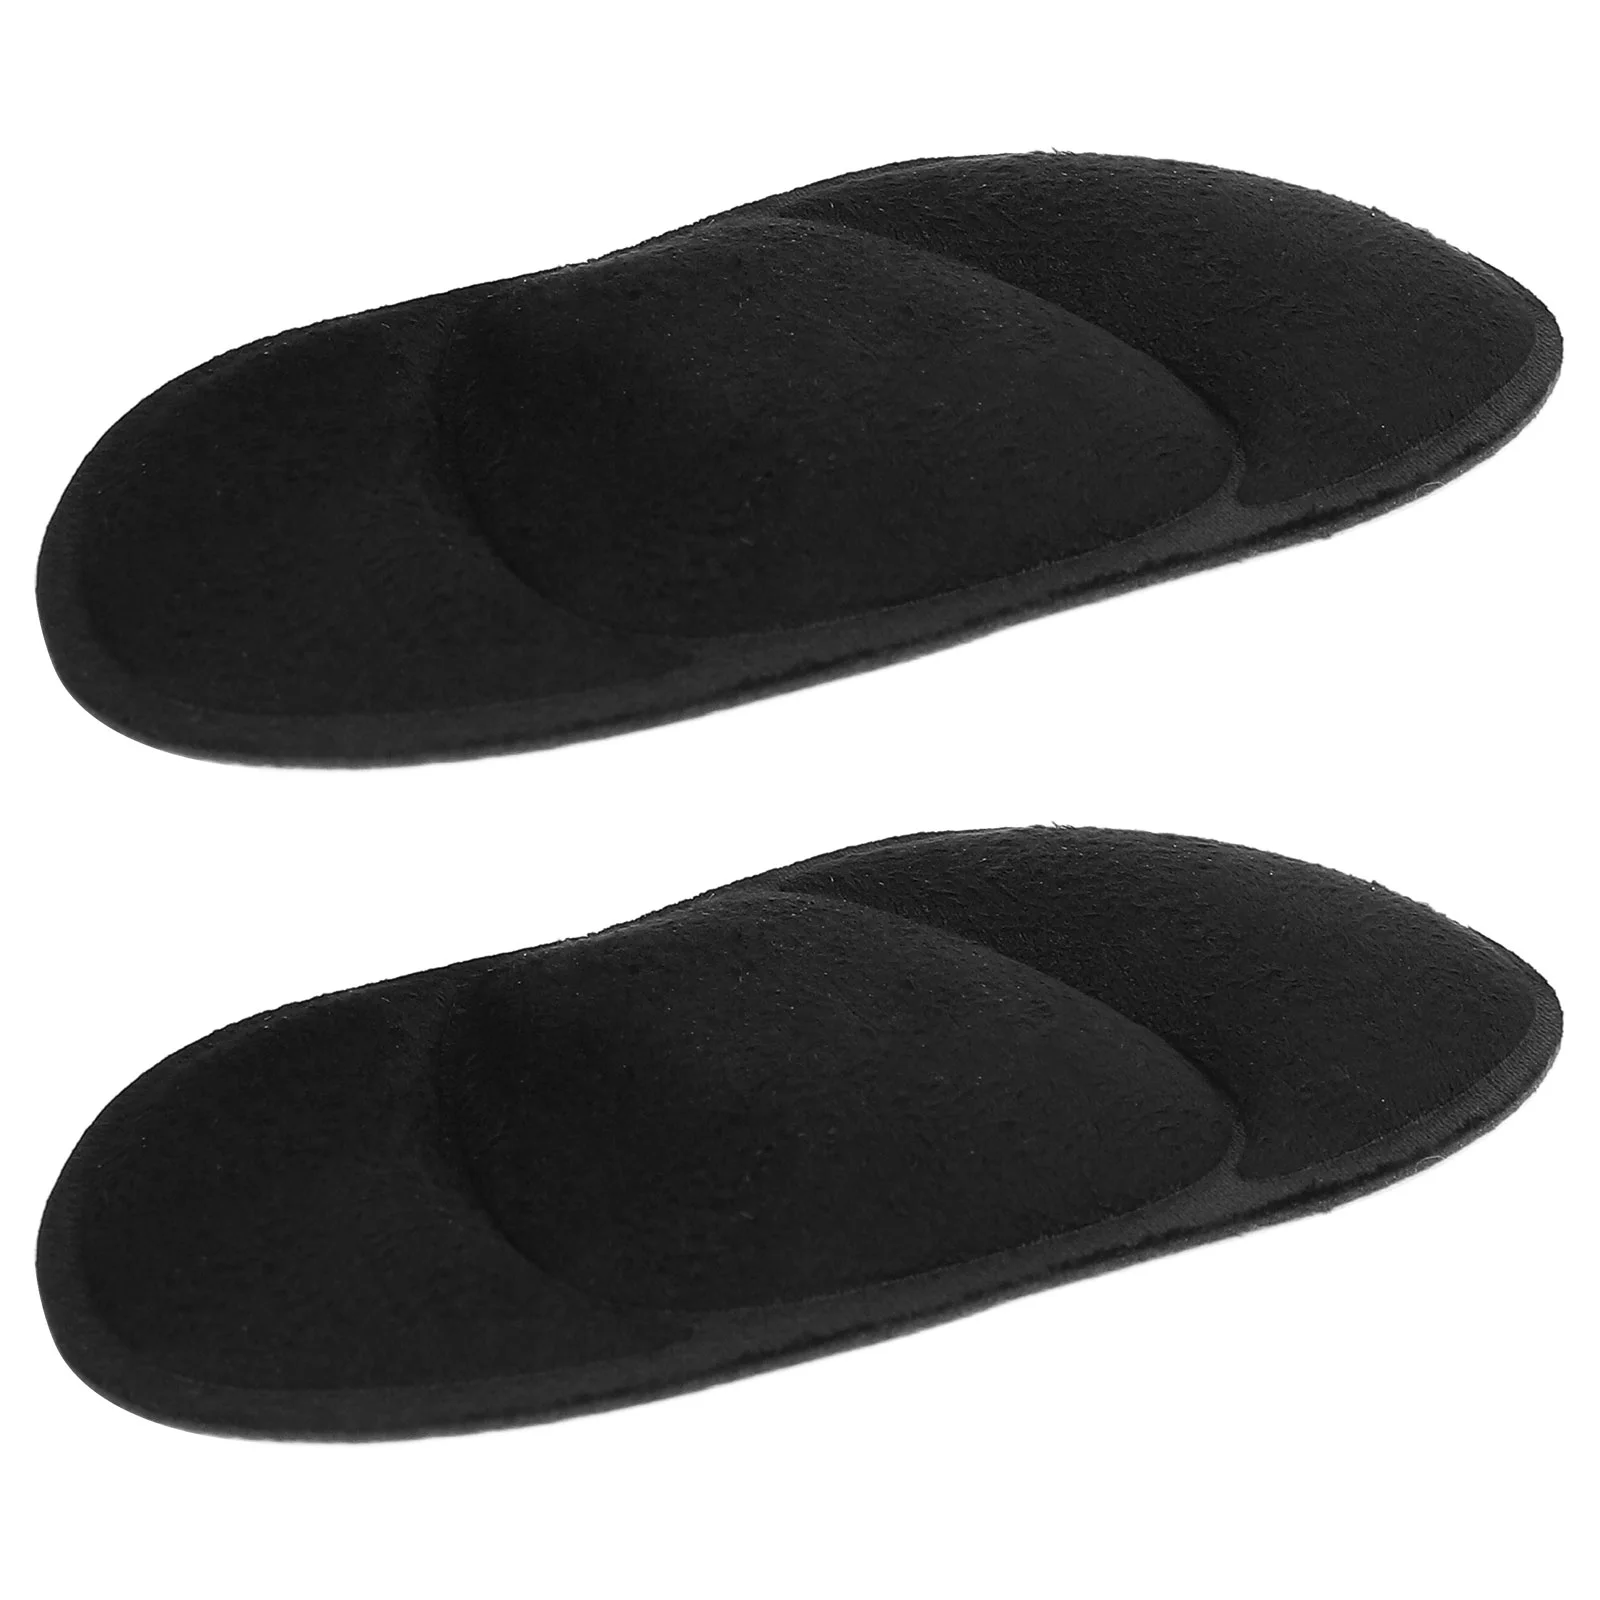 High Heel Insole Wear-resistant Cushions Comfort Pads Shoe Women Shoes Comfortable Inserts